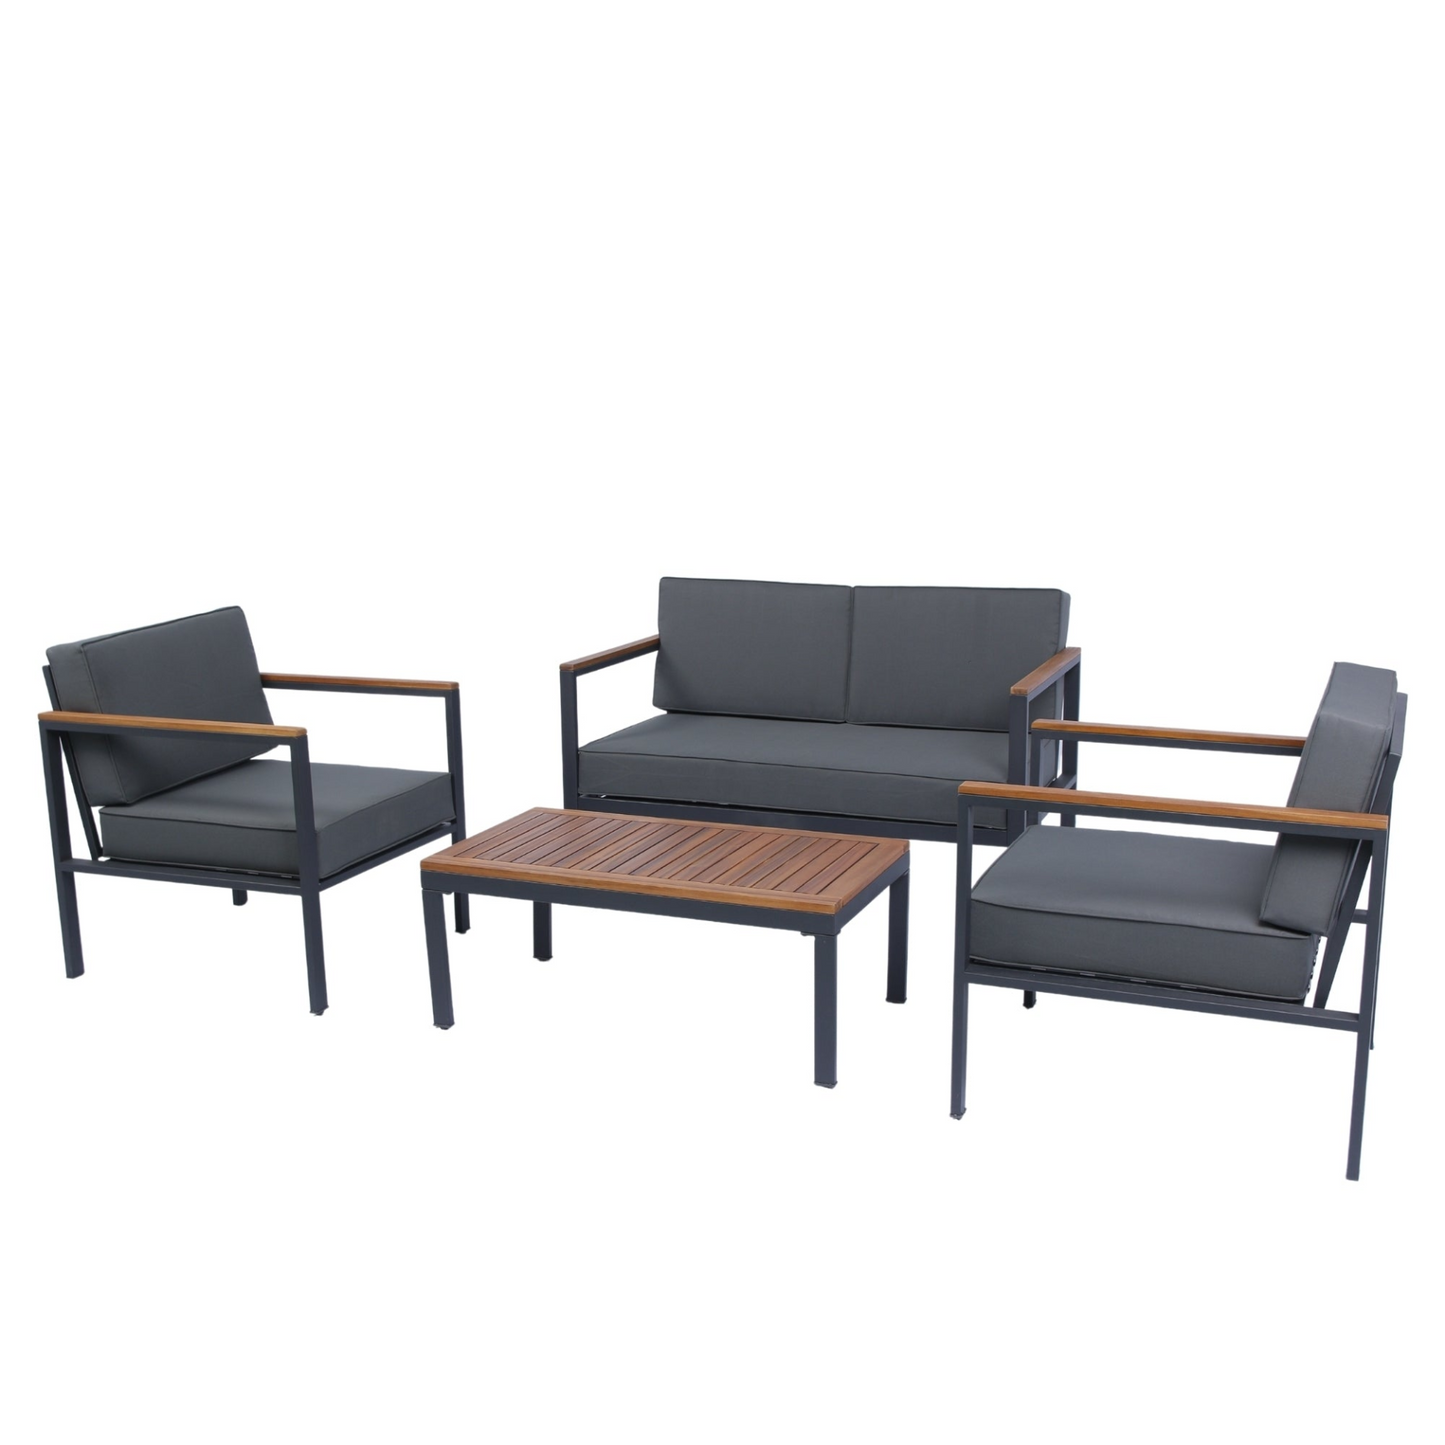 4 Piece Outdoor Sofa Set with Acacia Wood Top, Padded Patio Conversation Table Chair Set w/Coffee Table for Garden, Backyard, Poolside Dark Grey Cushion Môdern Space Gallery